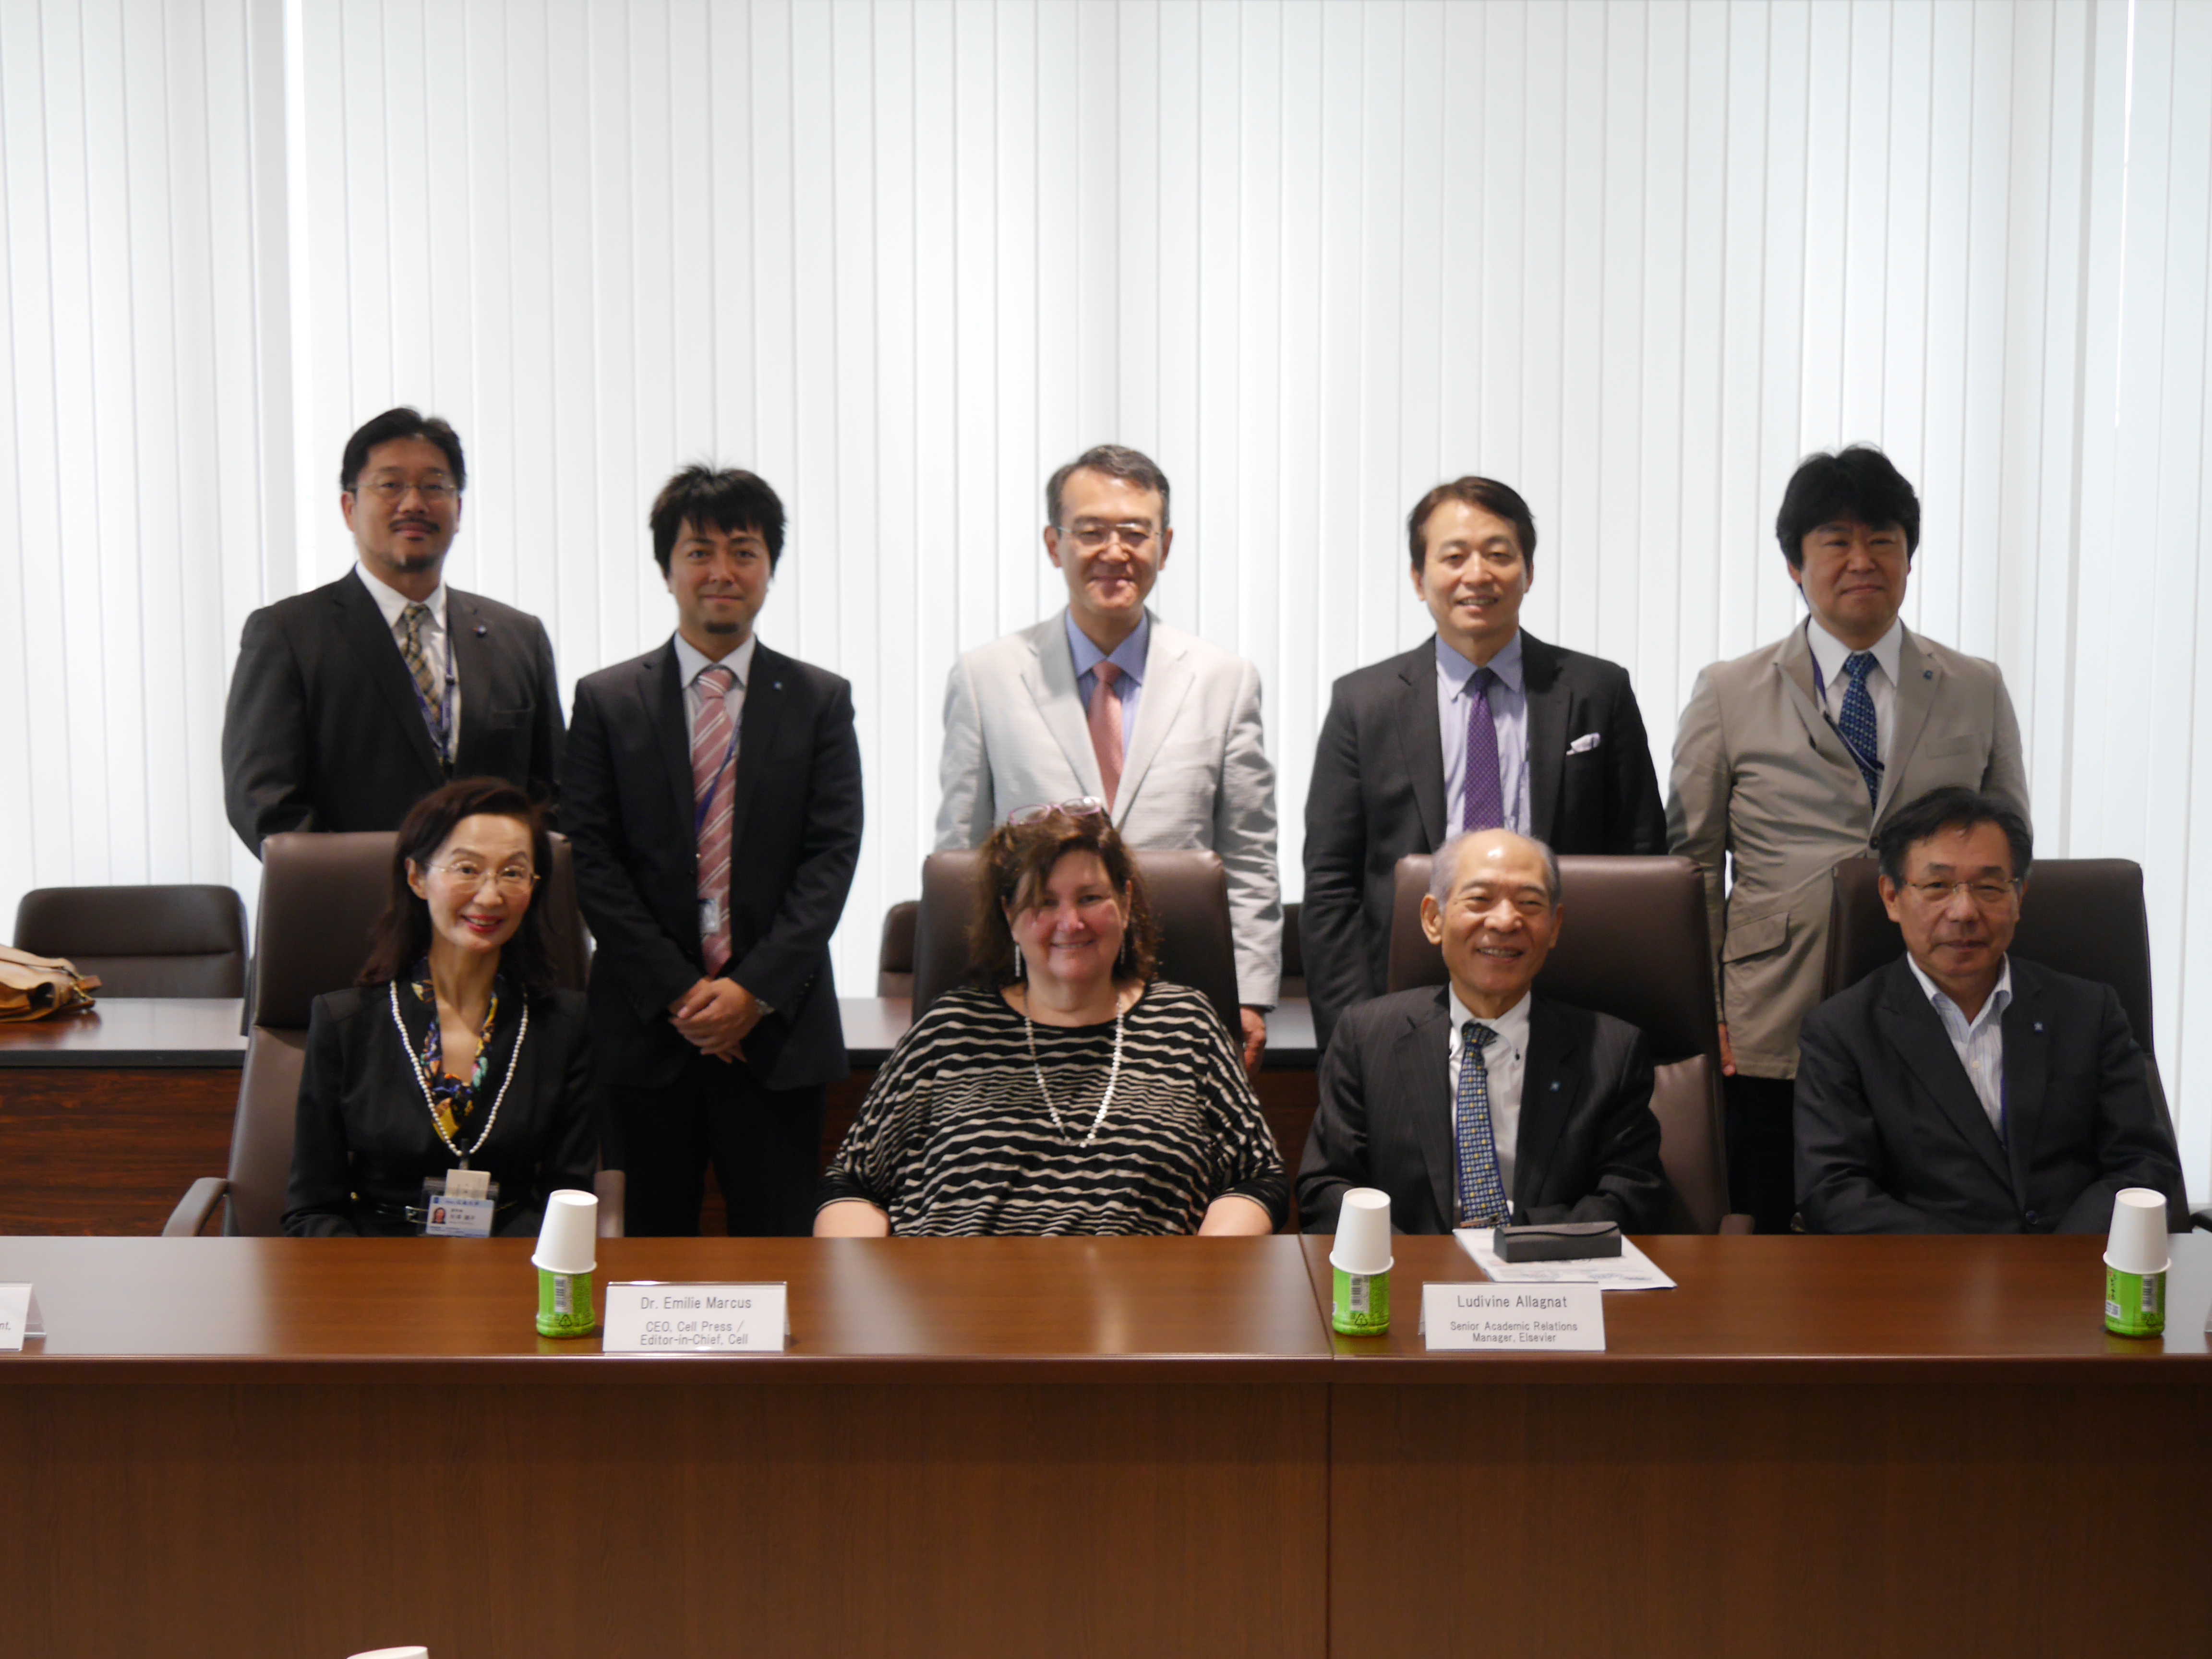 Dr. Emilie Marcus, the CEO of Cell Press, visited Kindai University